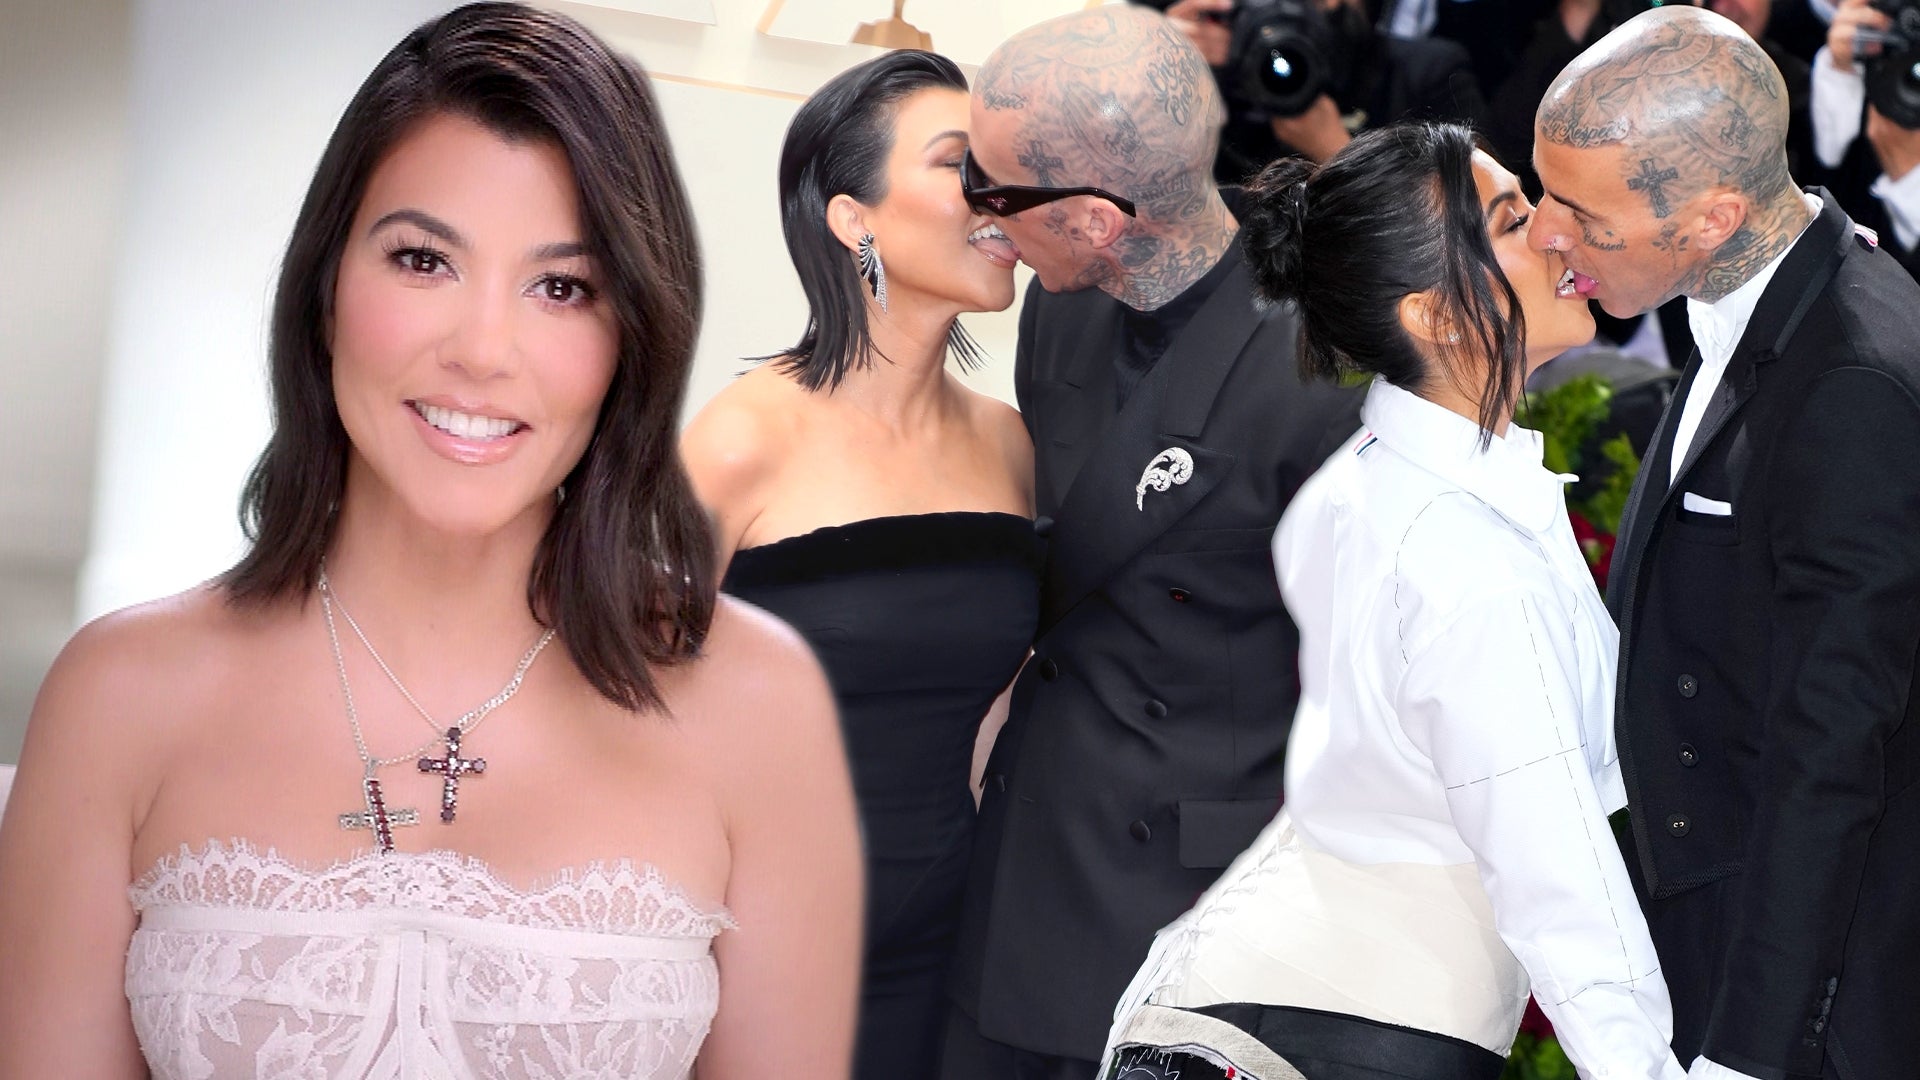 Watch Kourtney Kardashian Explain Why She and Travis Barker Kiss With Their Tongues 